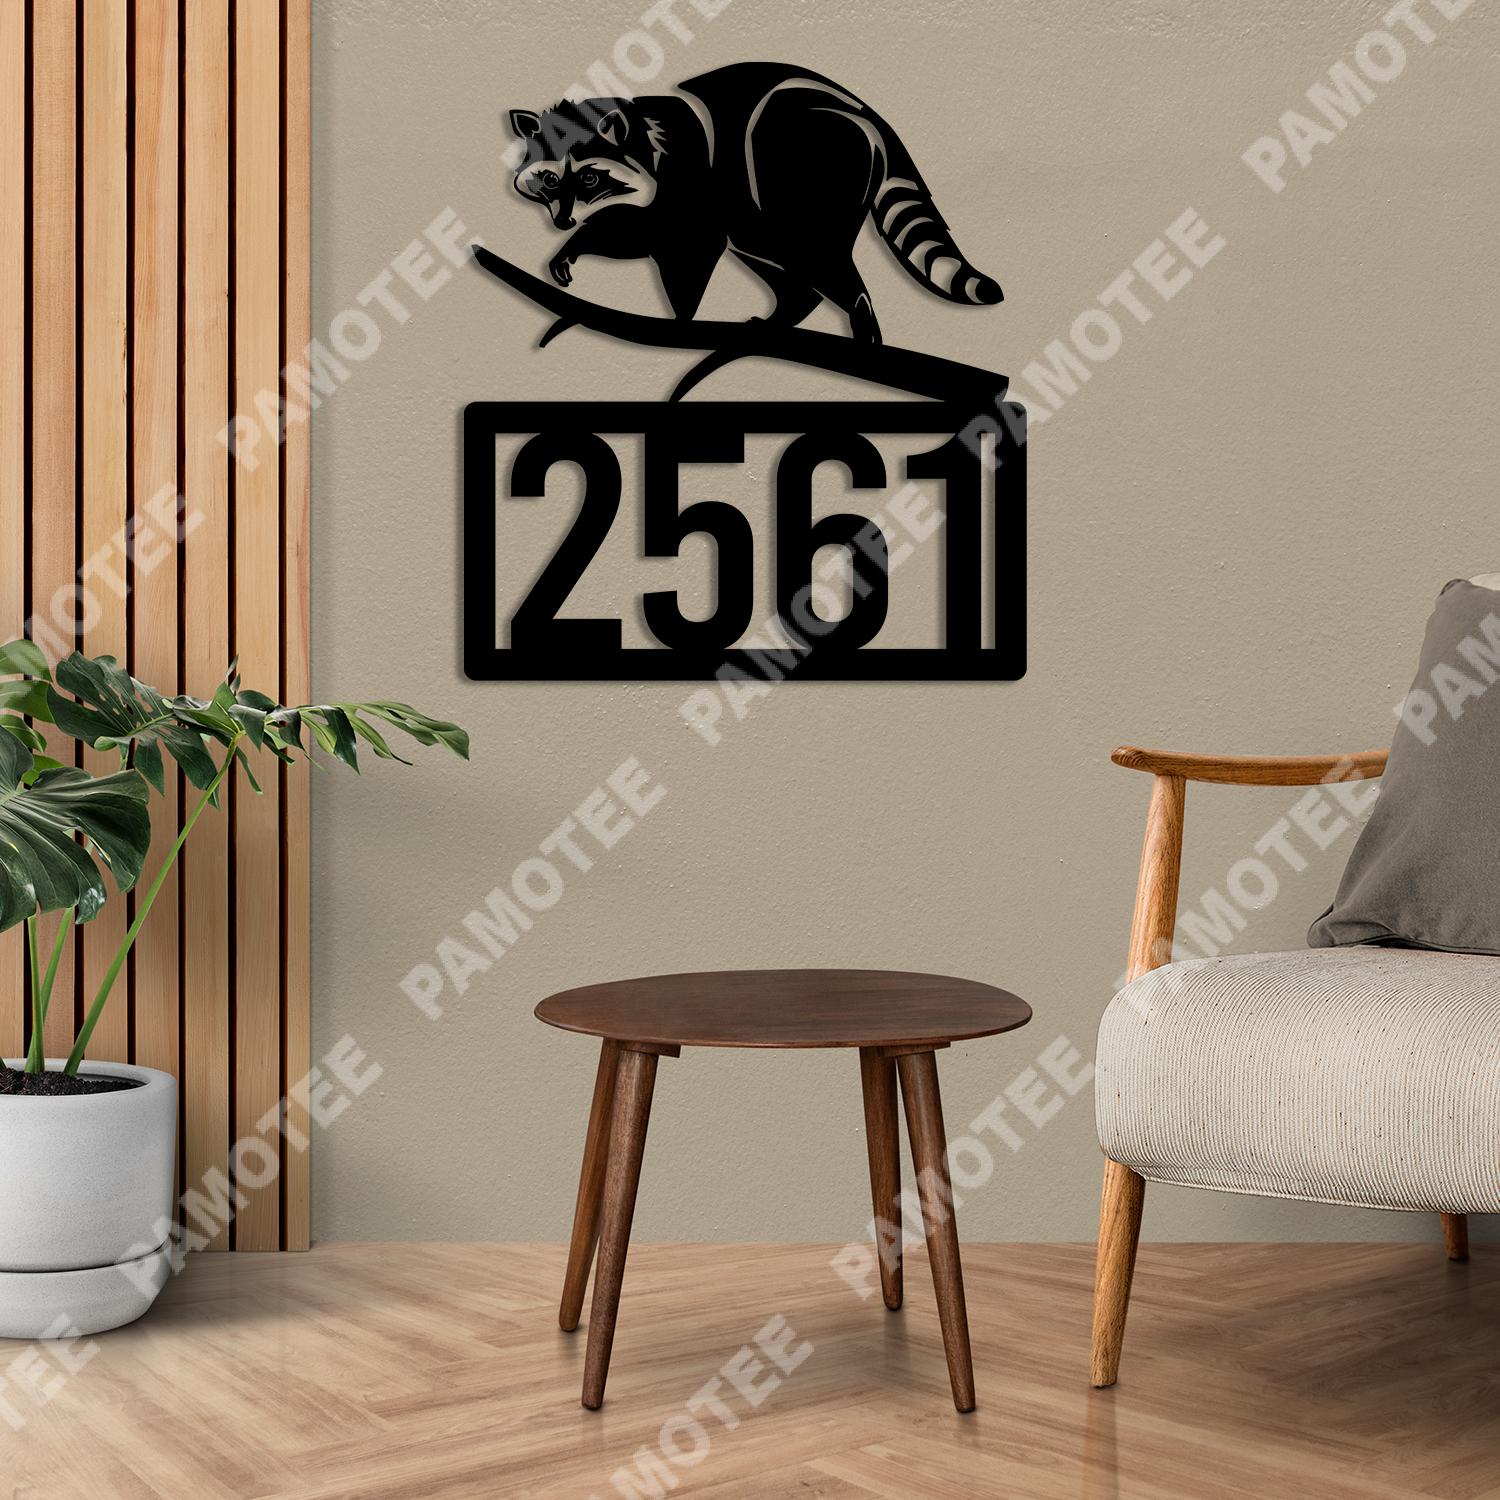 Personalized Address Number Raccoon Metal Sign, Wall Decor